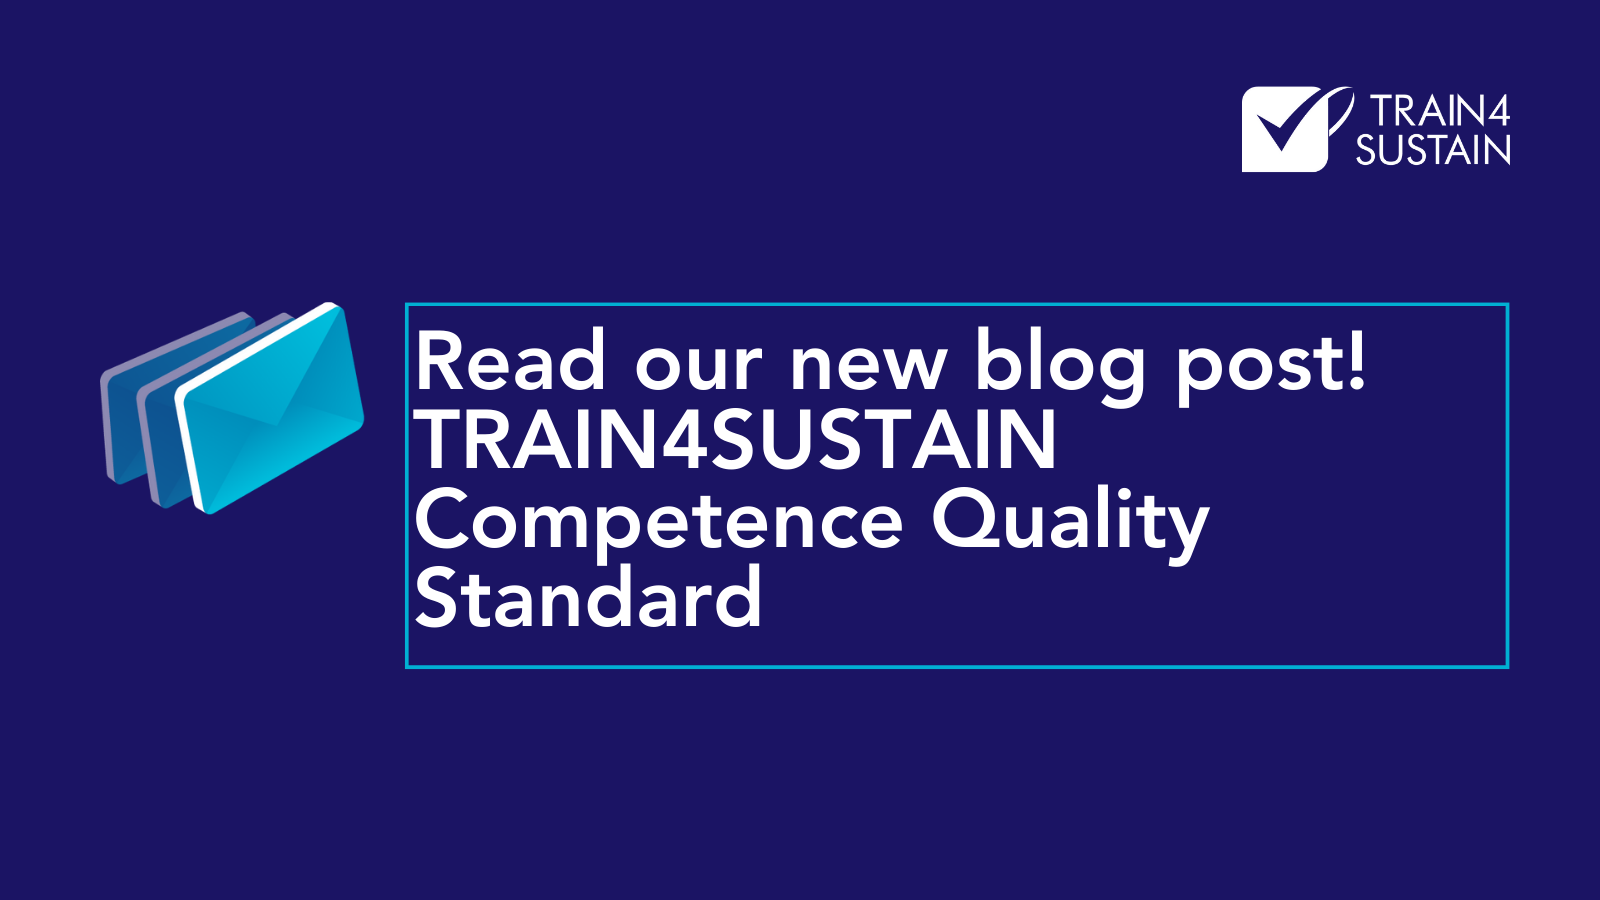 TRAIN4SUSTAIN Competence Quality Standard